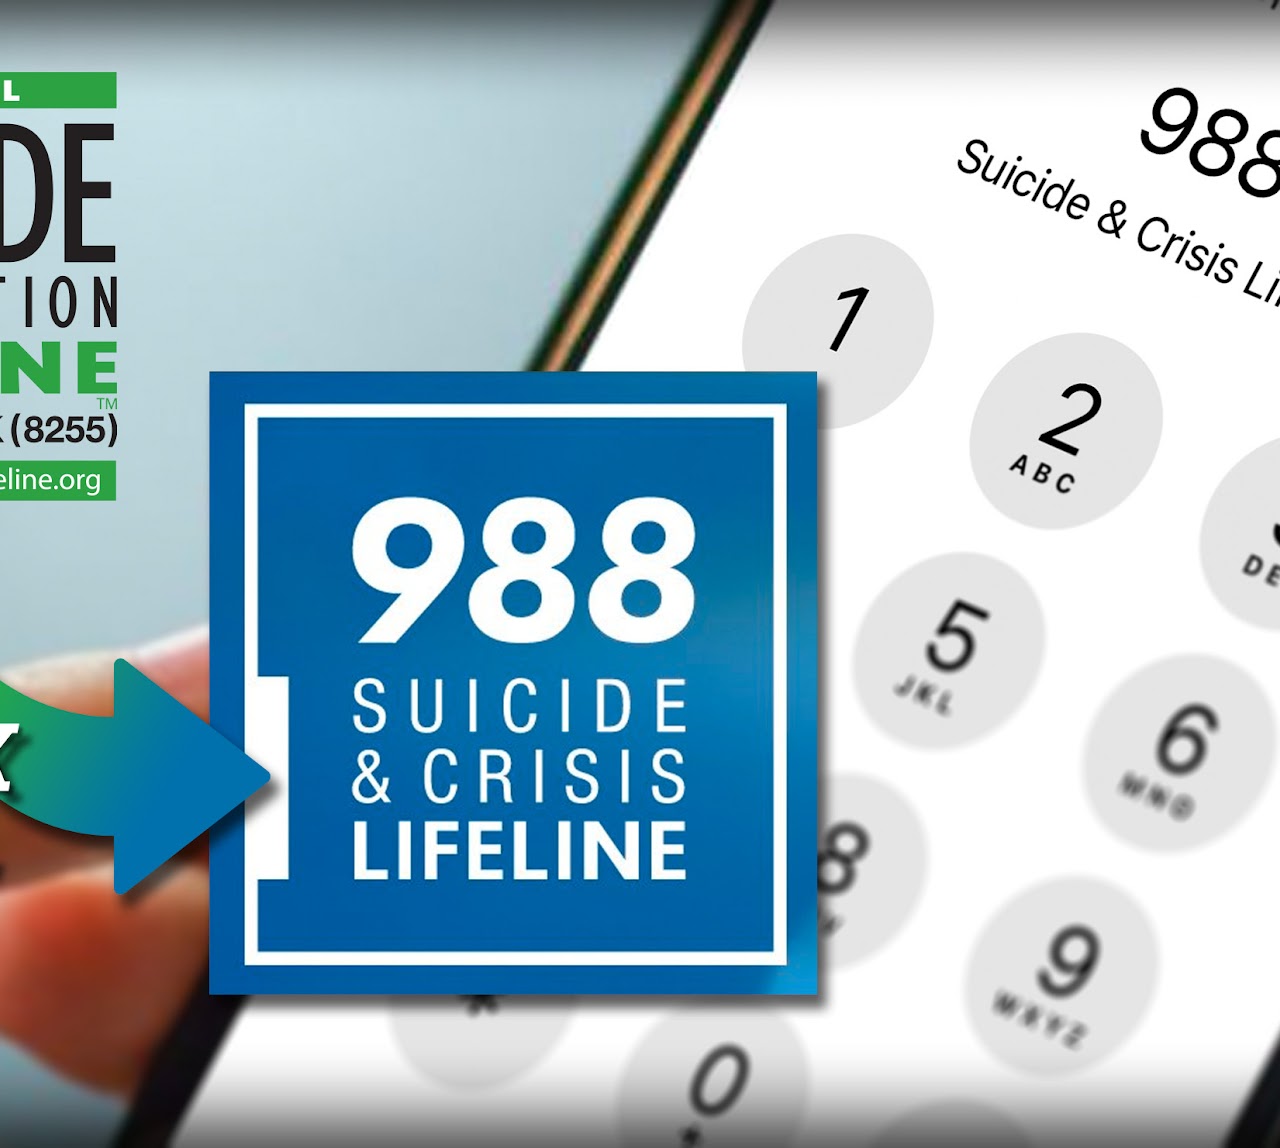 The image features a smartphone displaying a phone number and the message "981 24/7 Crisis Line." Adjacent to the phone, there's a graphic that includes an arrow pointing to a web address, "Www.suicidepreventionline.org," along with a logo and text that reads "981 24/7 Lifeline" at the bottom. The overall message conveyed by this image is a call for support or assistance in case of a crisis, particularly related to suicide prevention.